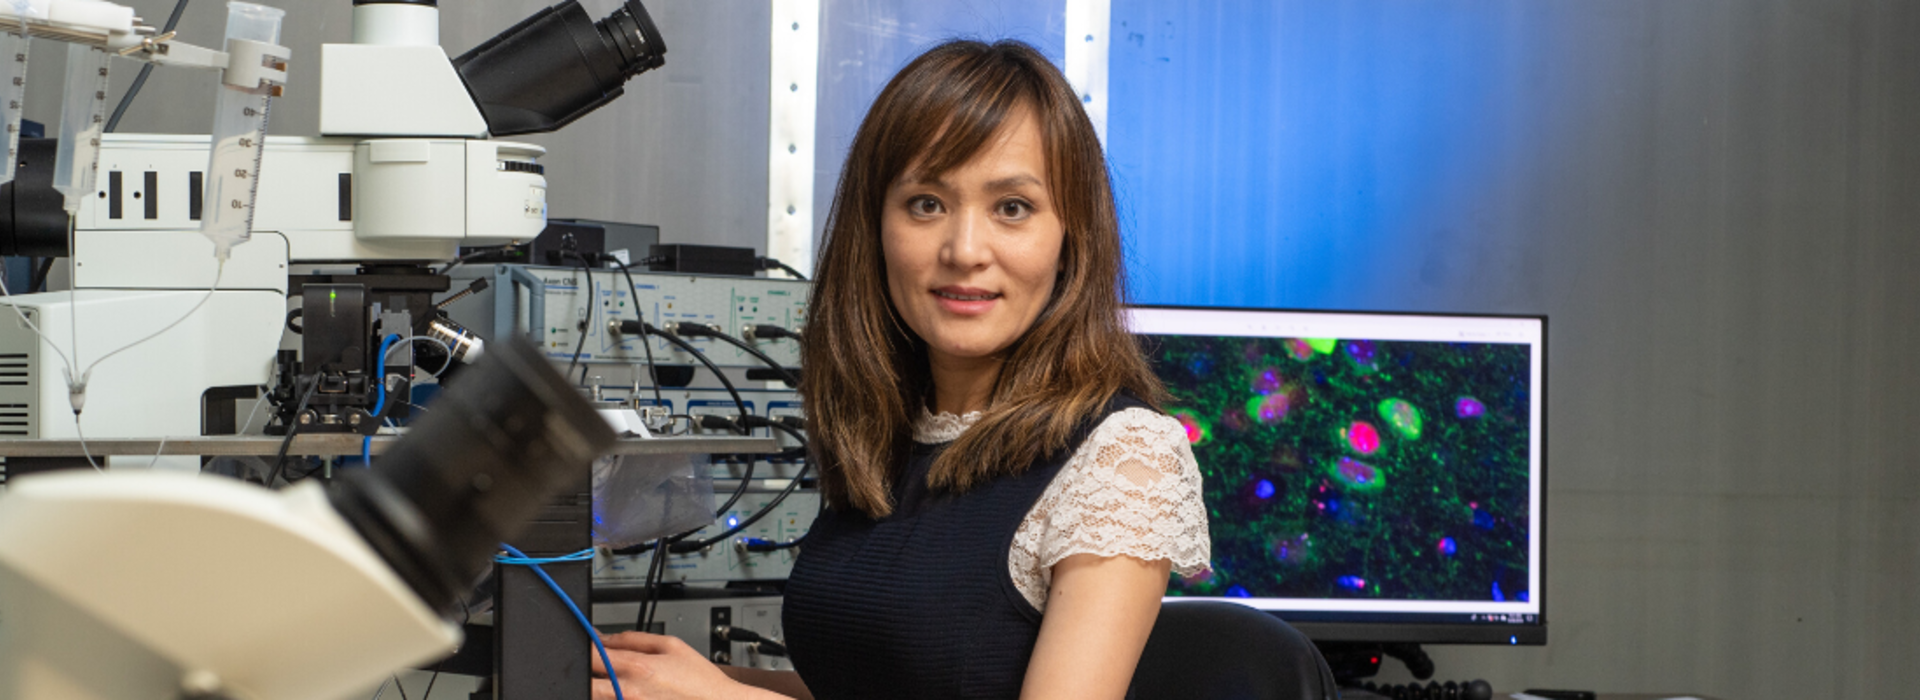 Yang Lab Publishes Strategies for Potential Therapies of Autism